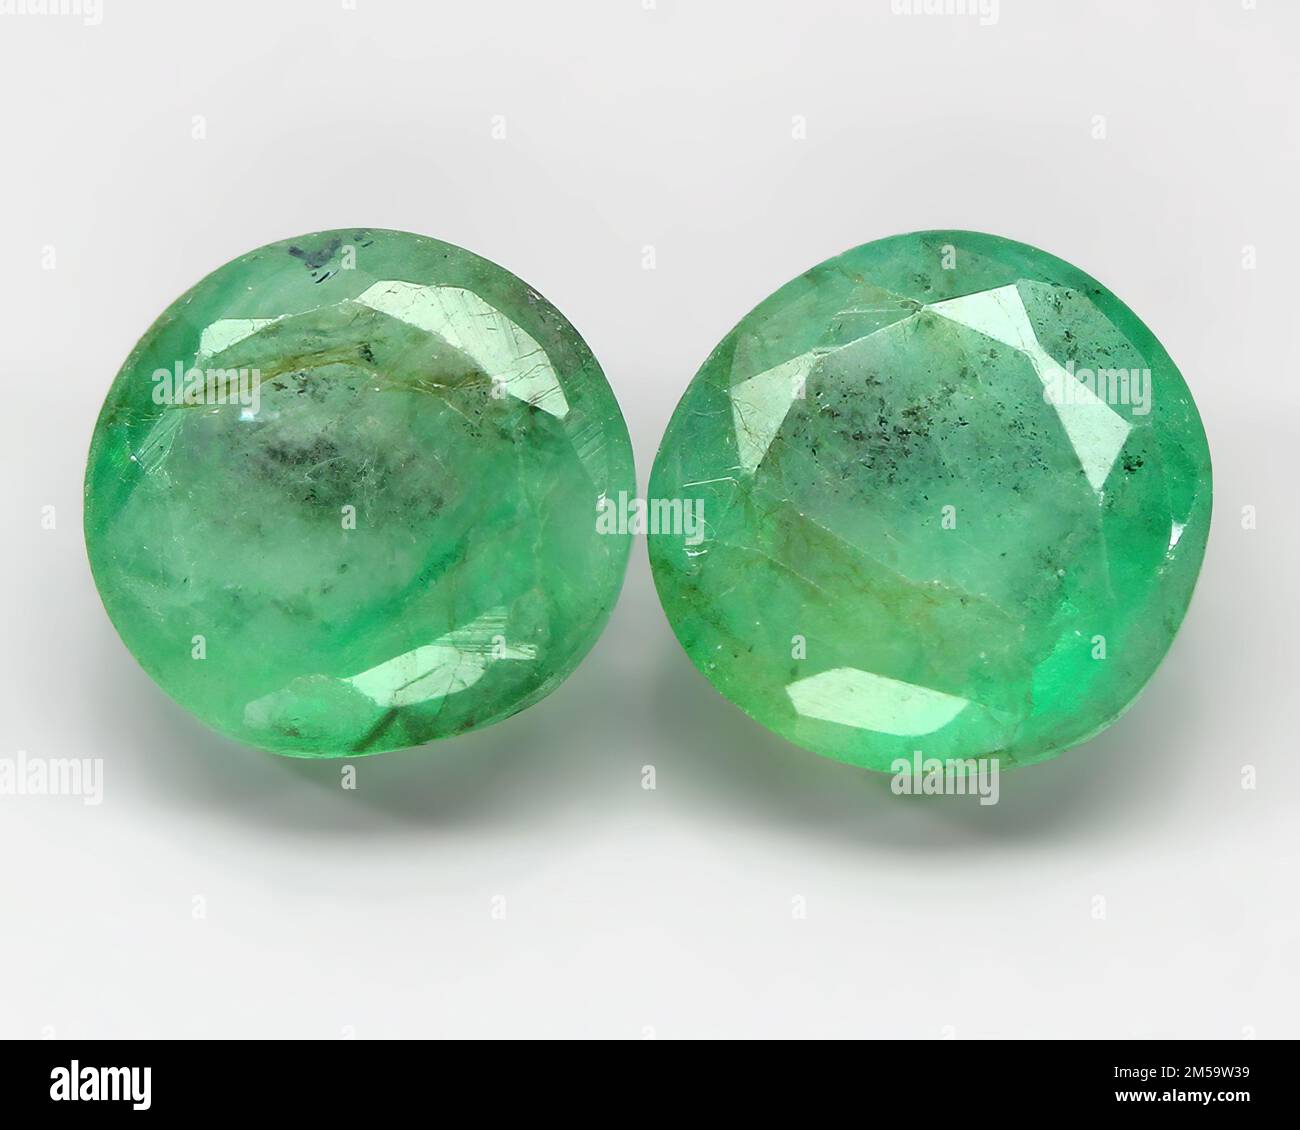 Natural gemstone green emerald on a gray background Stock Photo